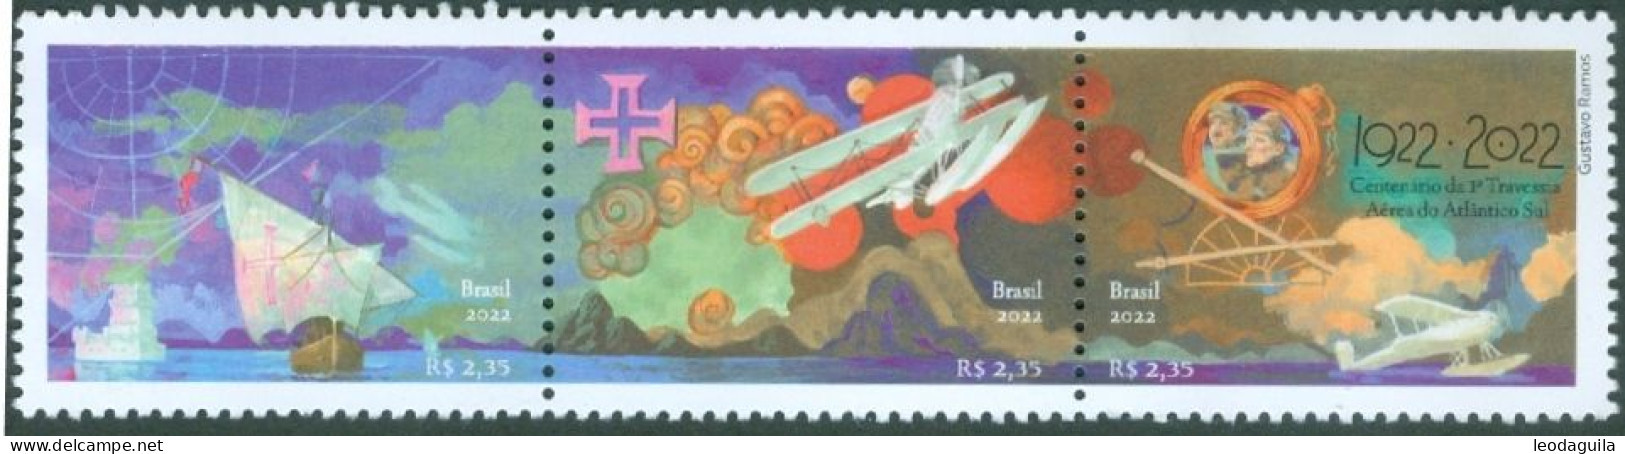 BRAZIL &  PORTUGAL - FIRST CROSSING OF THE SOUTH ATLANTIC BY AIRPLANE- CENTENARY - TRIPTICS - BOTH ISSUES 2022 - MINT - Nuovi